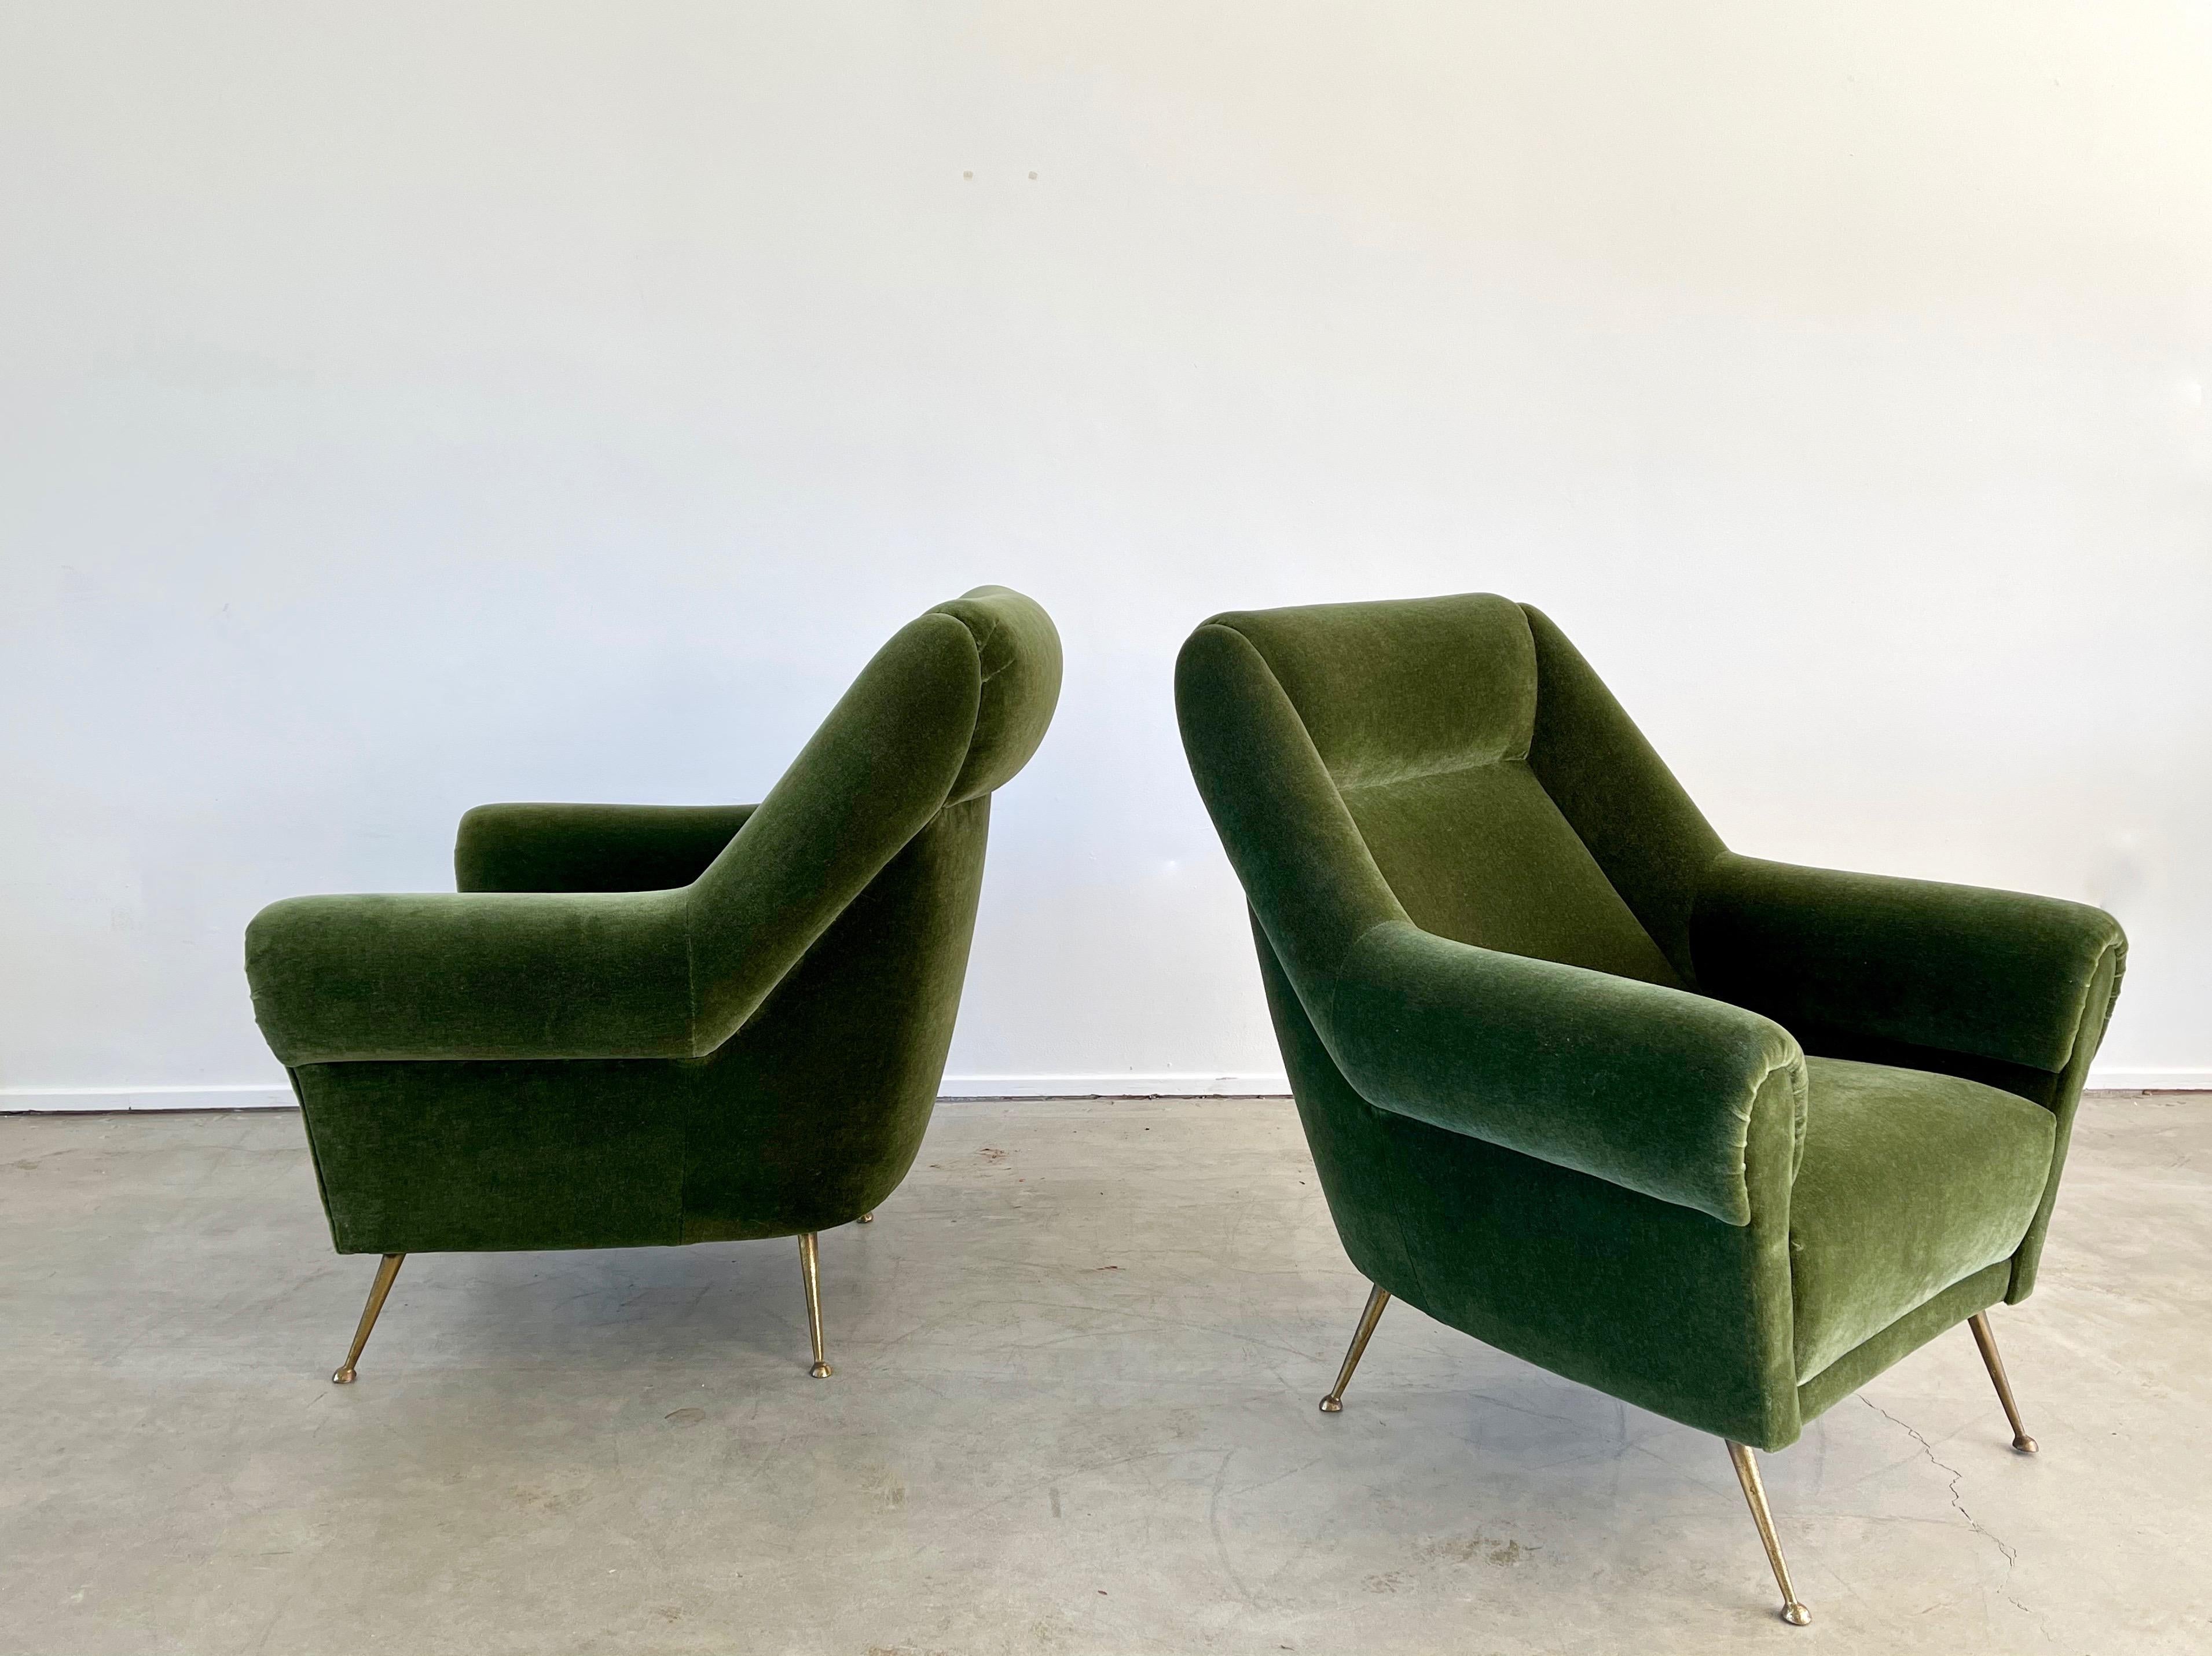 1950's Italian Lounge chairs reupholstered in olive green mohair with great curved arms and large in scale. 

Solid brass legs with great patina.
 